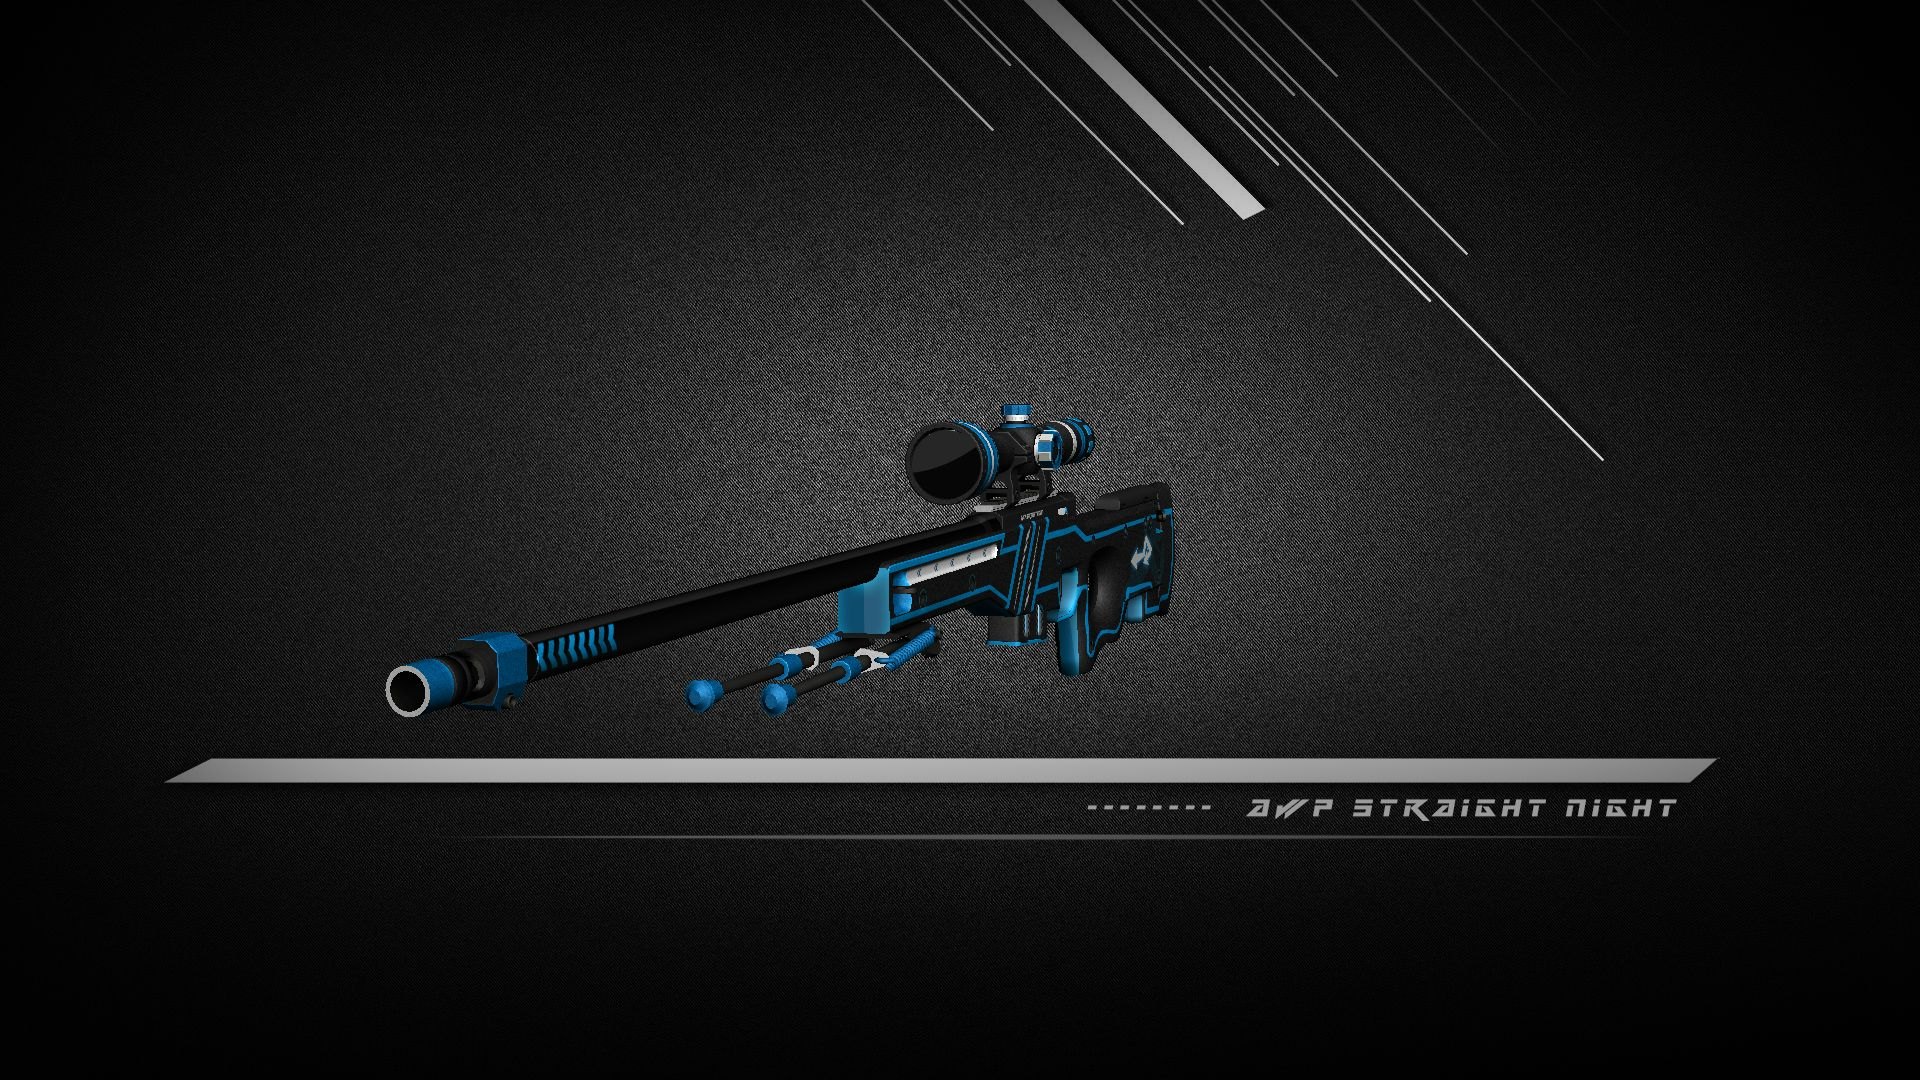 Awp cannons карта мастерская фото 82